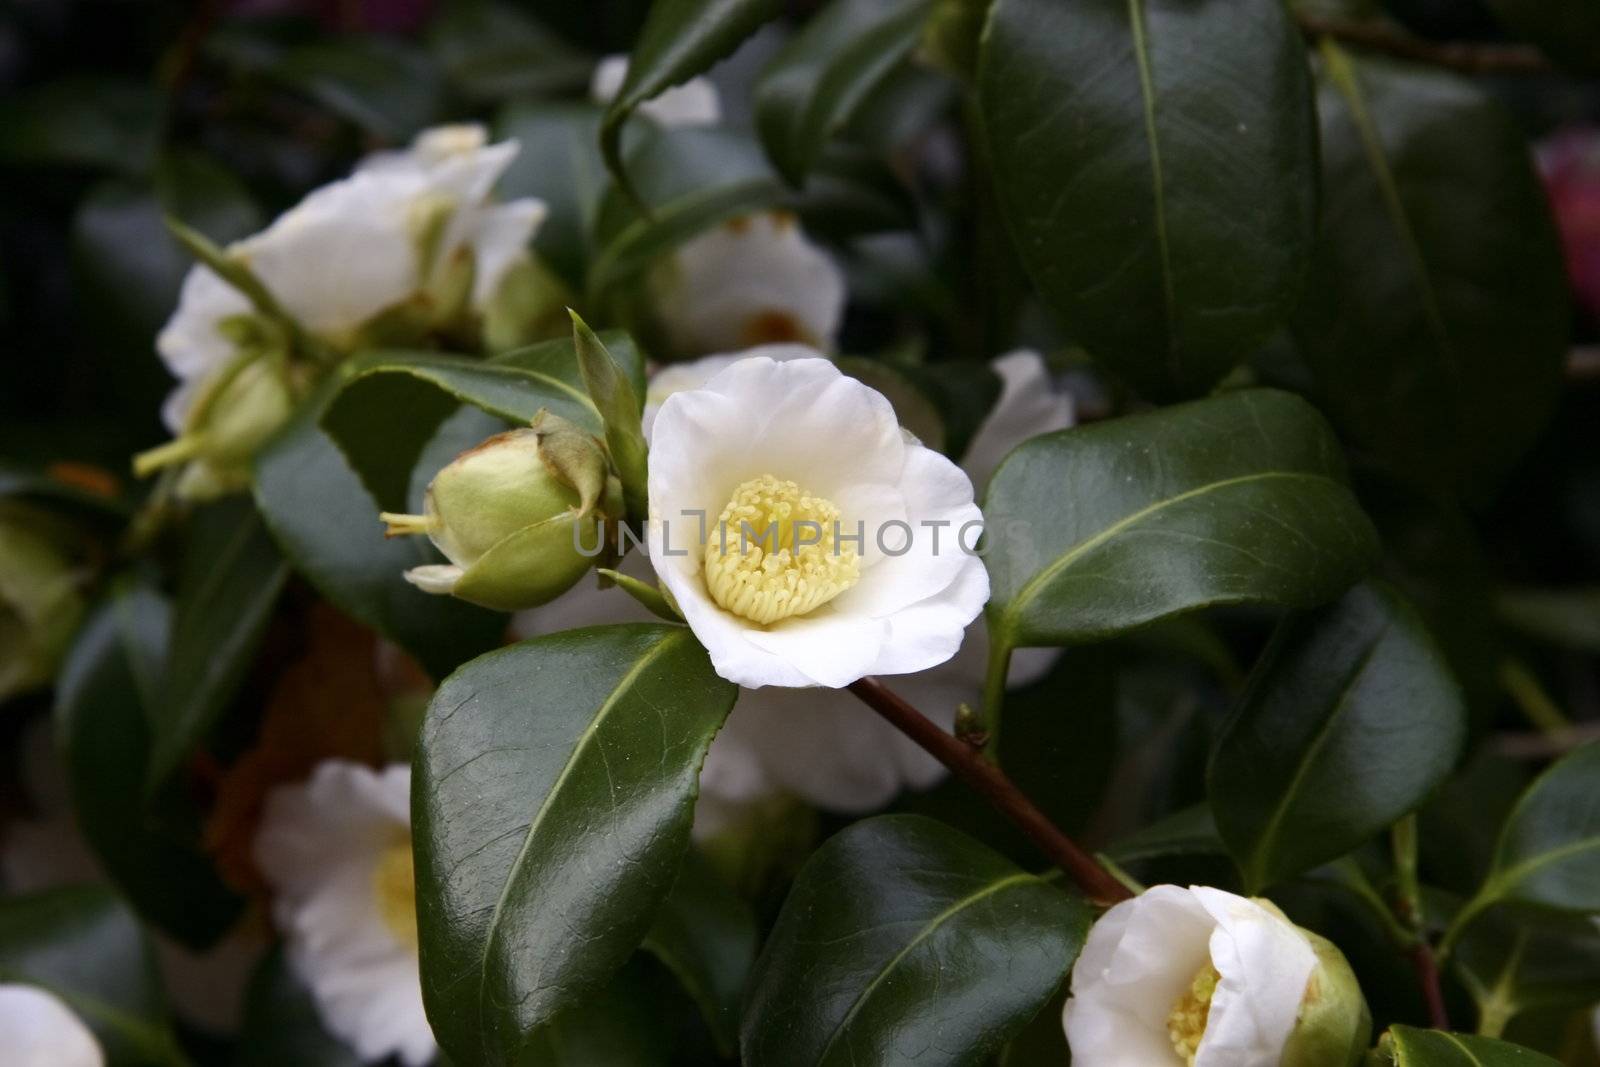 beautiful detail of the camelia flower on the bush